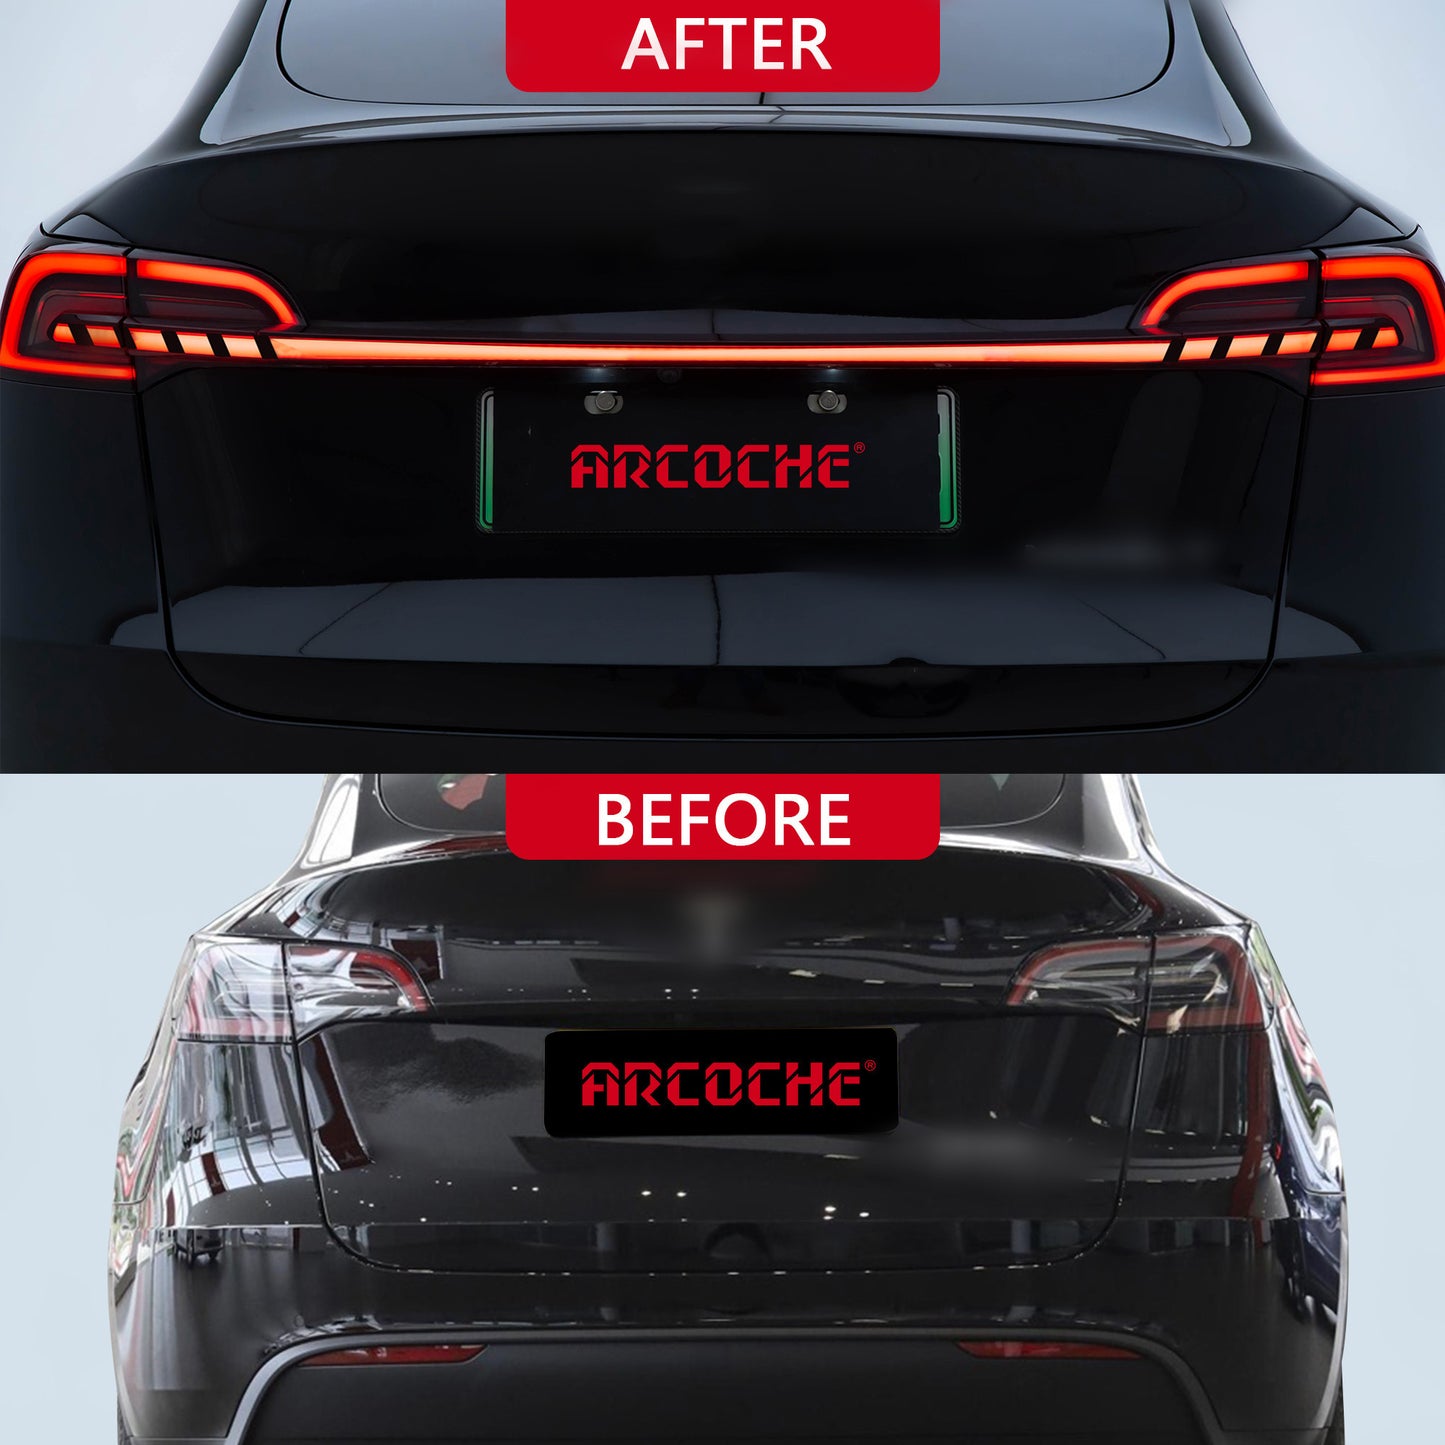 tesla model 3 Y car 2022 2023 2021 2020 2019 2018 s3xy  Through Tail Dynamic Lamp Set arcoche accessories accessory aftermarket price Vehicles standard long range performance sr+ electric car rwd ev interior exterior diy decoration price elon musk must have black white red blue 5 7 seats seat